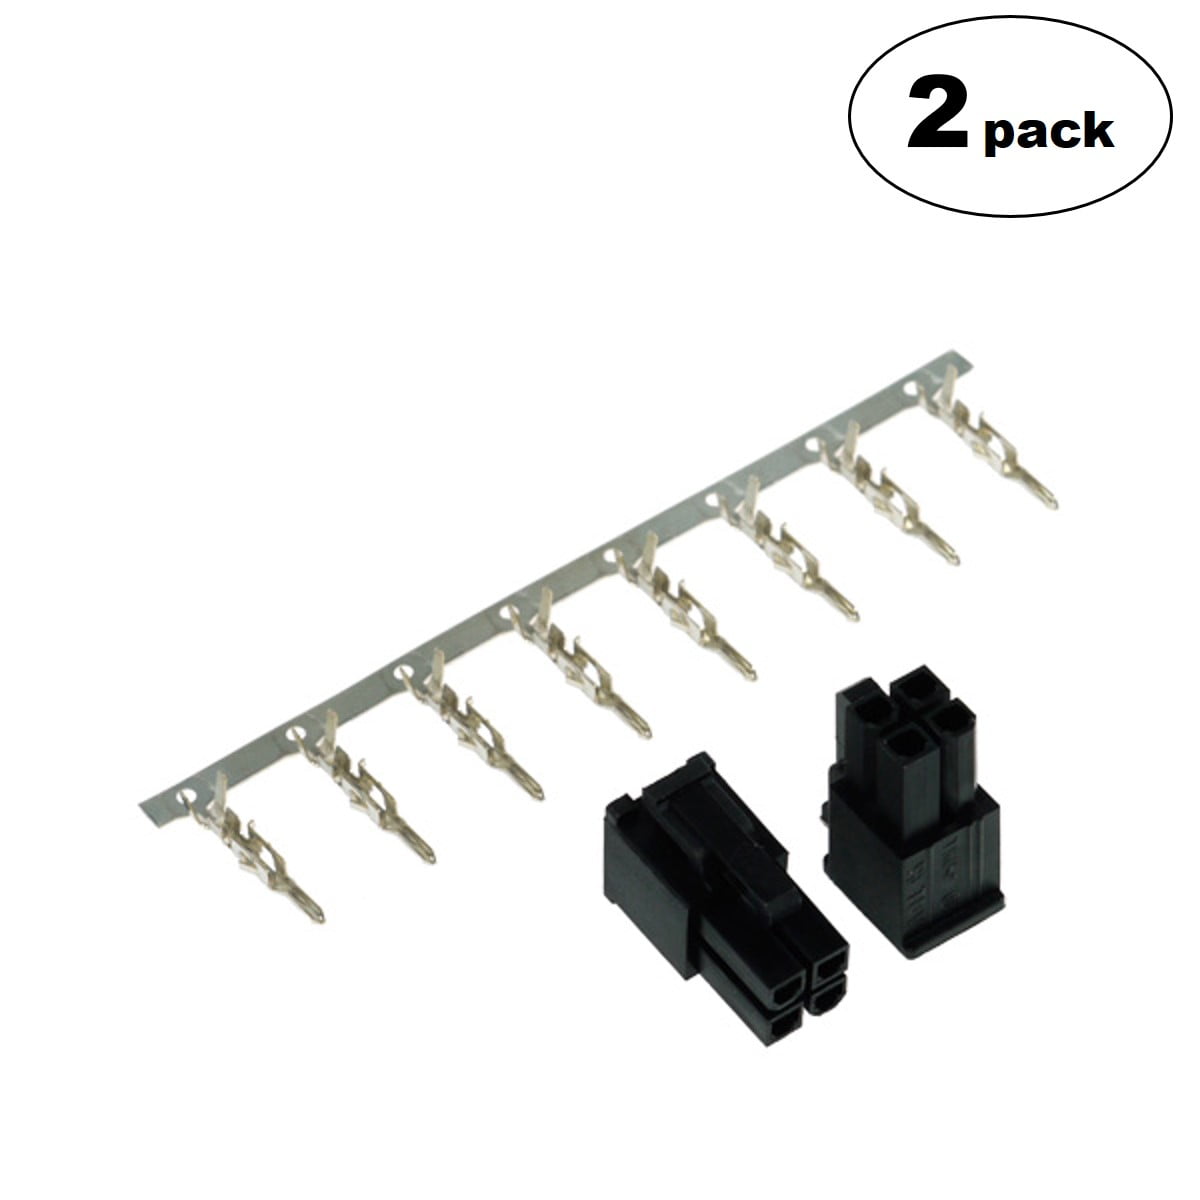 English Includes One Male/One Female Per Card Radnor RAD64002156 Model 2-MBP 300 Amp Cable Connector Set for 1/0-3/0 Cable Plastic 1 x 1 x 1 15.34 fl oz. 